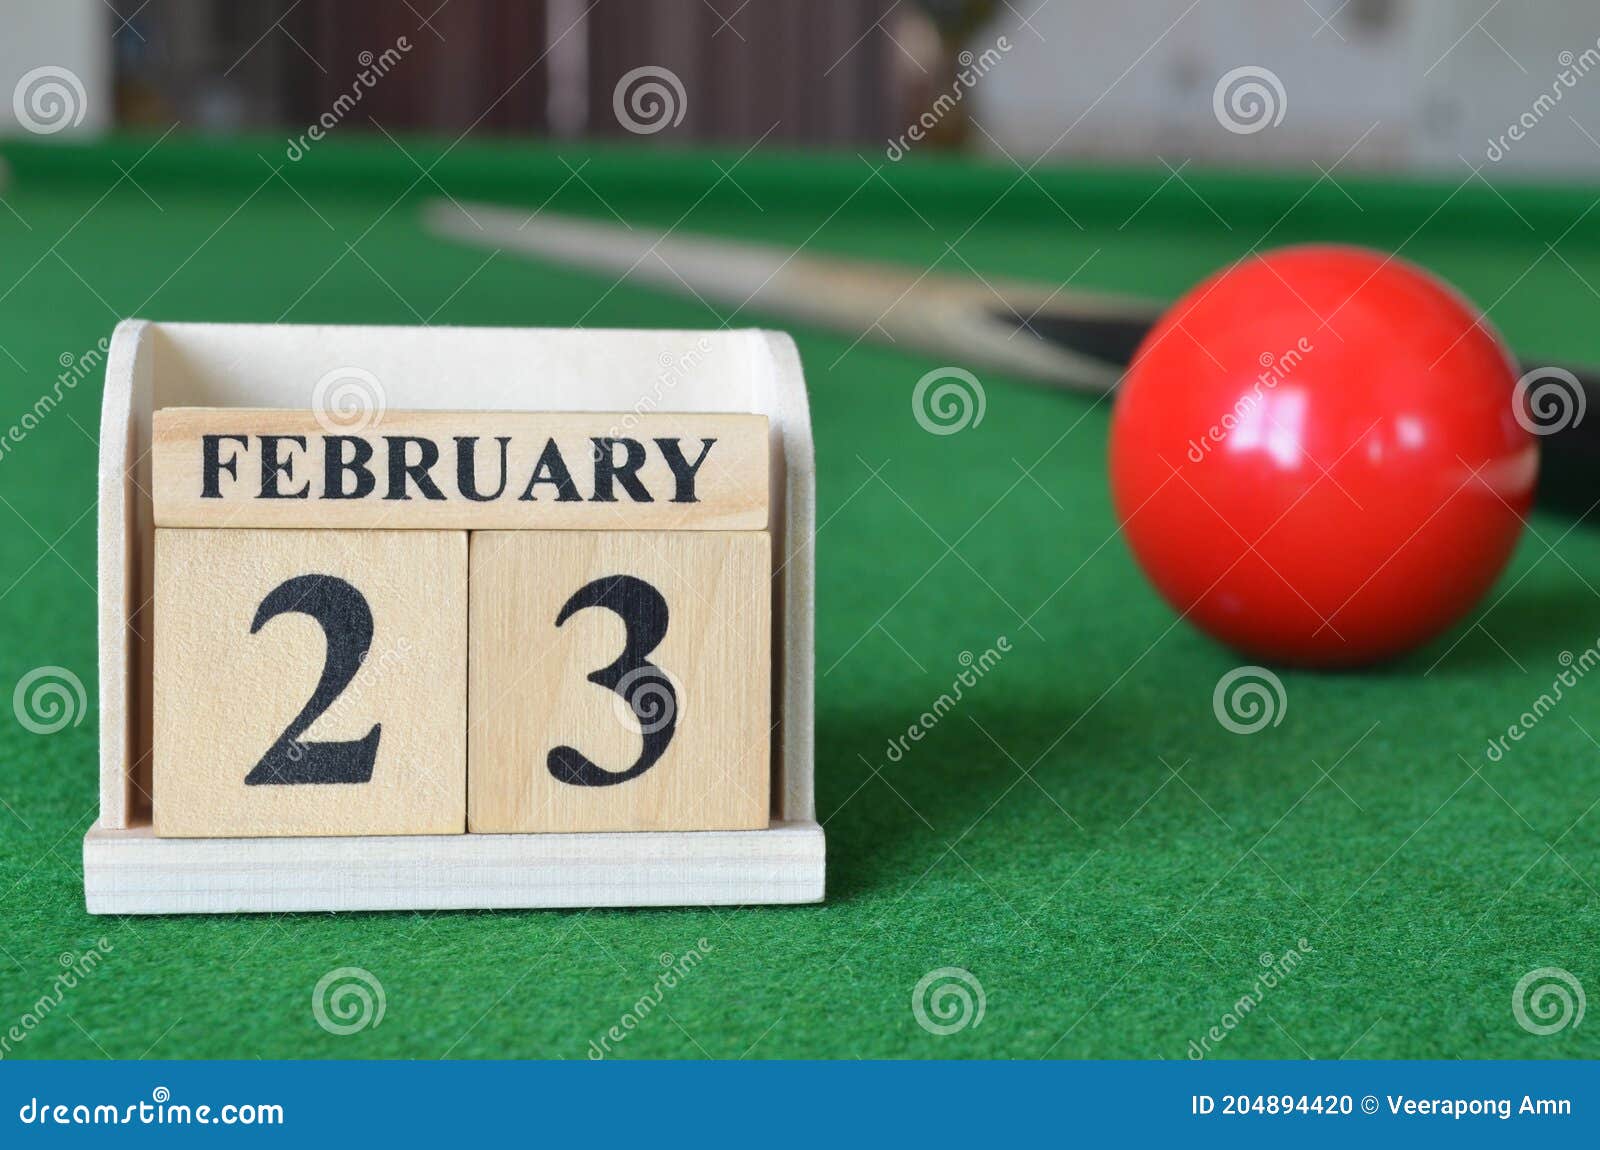 February 23, Number Cube on Snooker Table, Sport Background